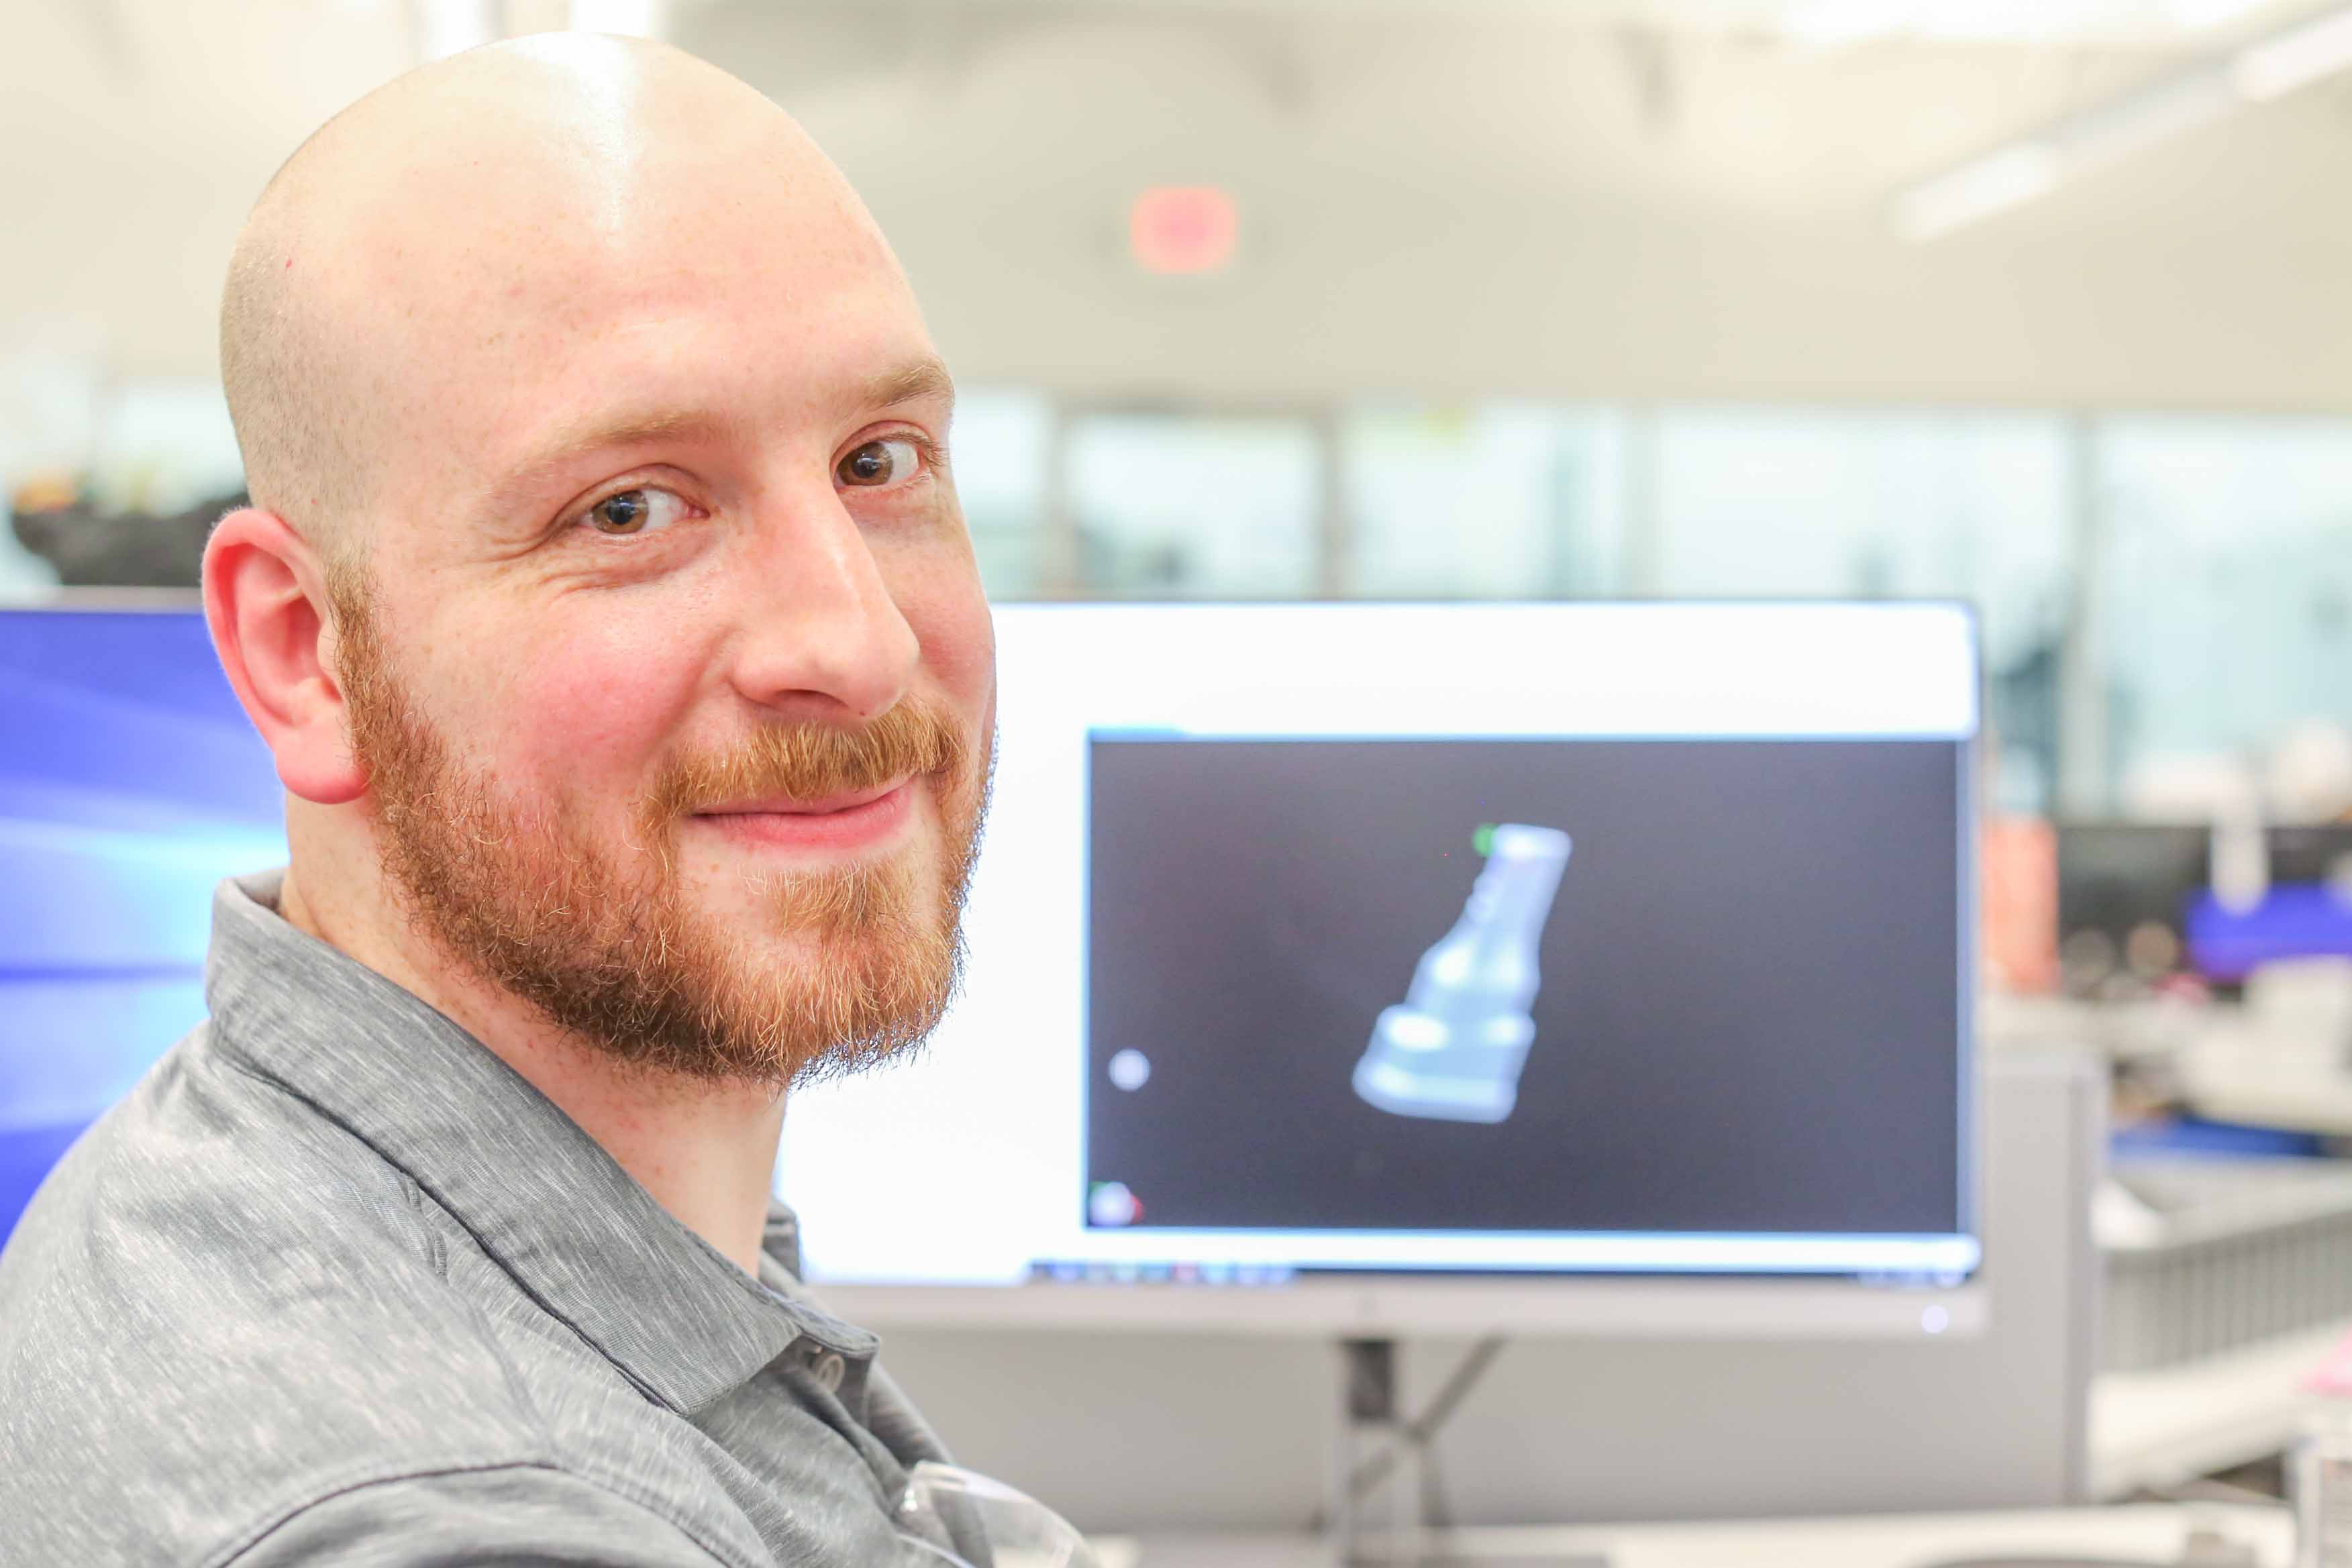 Zach Studt: Additive manufacturing engineer for the GE9X engine